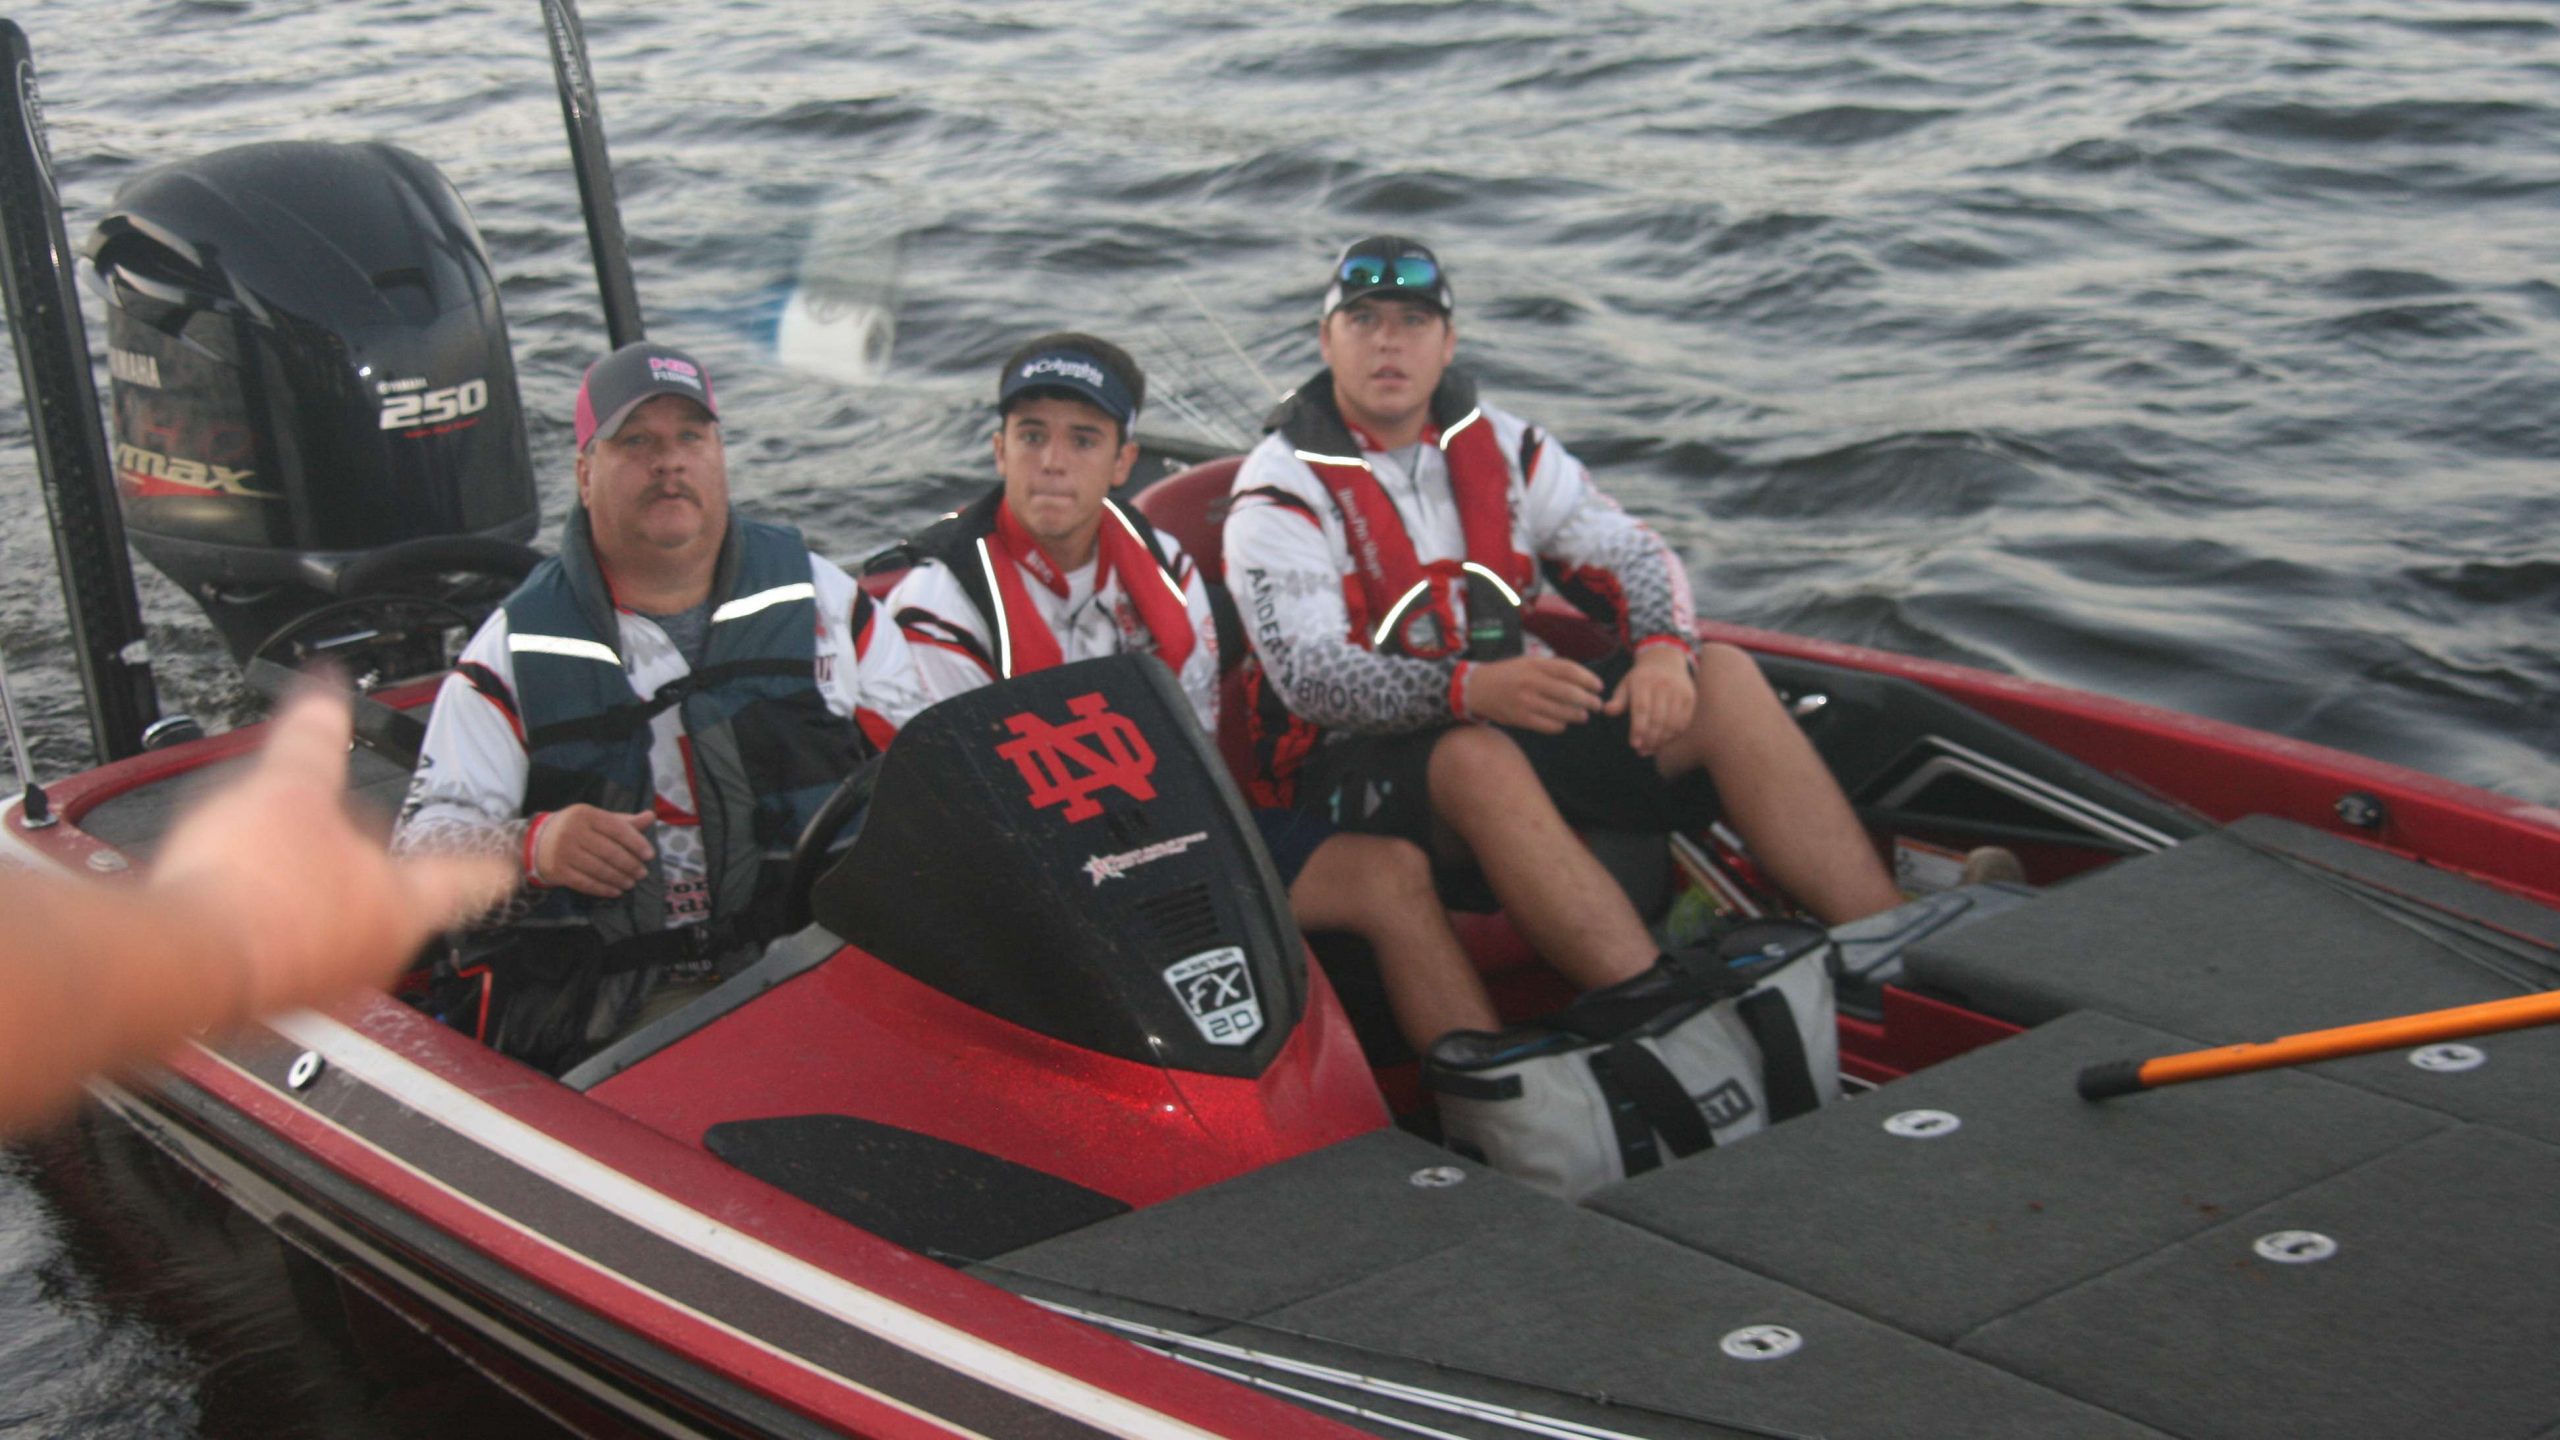 B.A.S.S. officials make sure this team is ready for its first catch of the day.